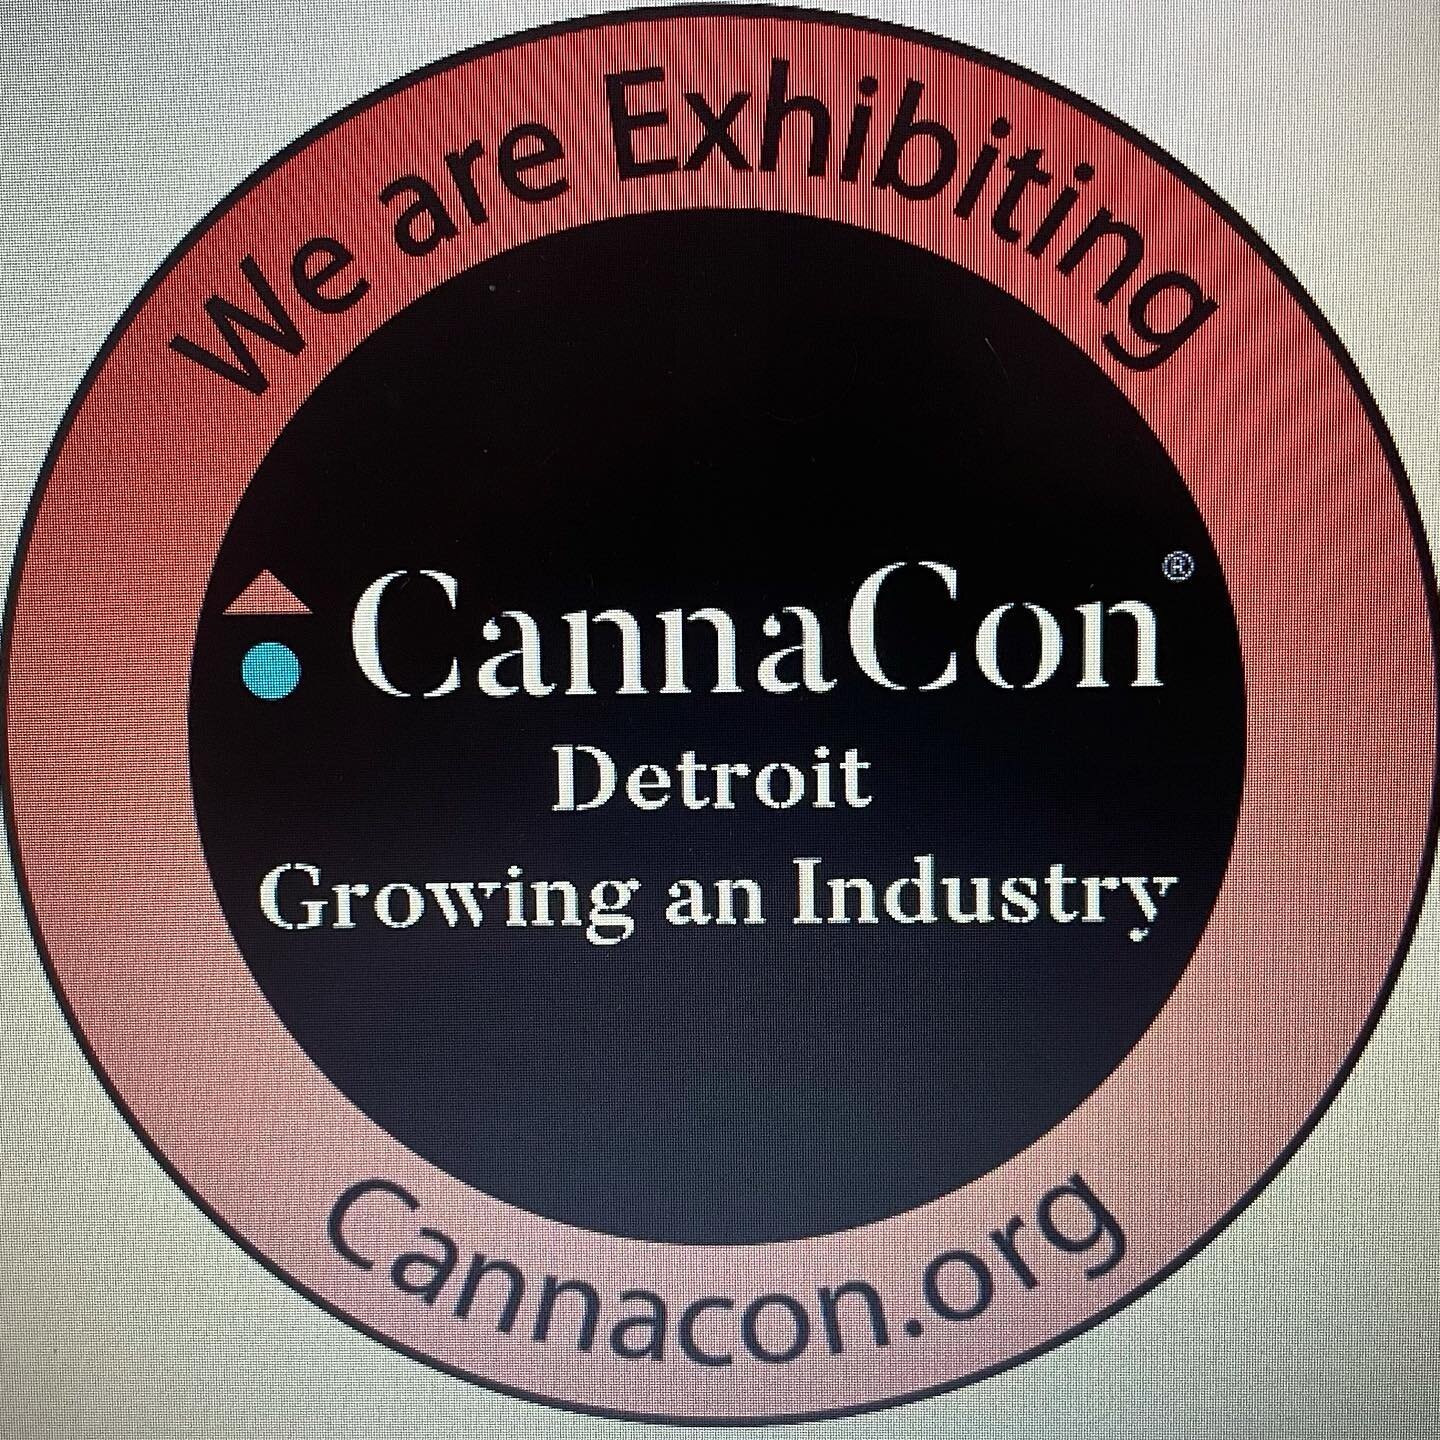 Canna con is back. Join us June 25-26 and come visit us at our booth. We will have a TON of great sales. Also use promo code CC50 and get half off your entrance fee. #cannacon #detroitcbd #icon #iconprocessors #michigancbd #michigancanna #extractions